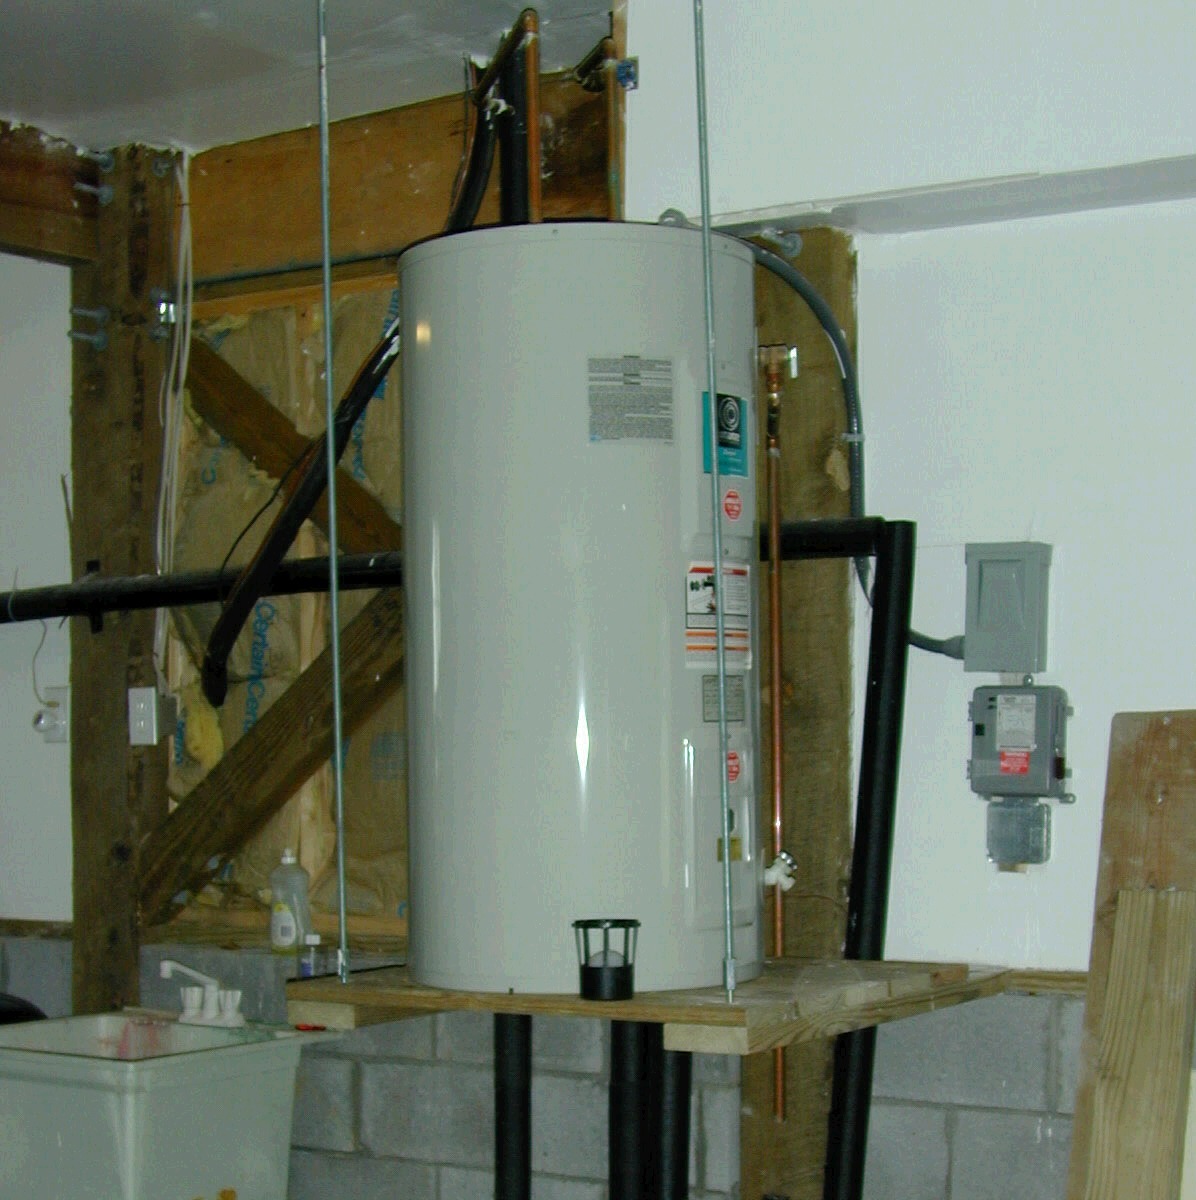 water heater with damage